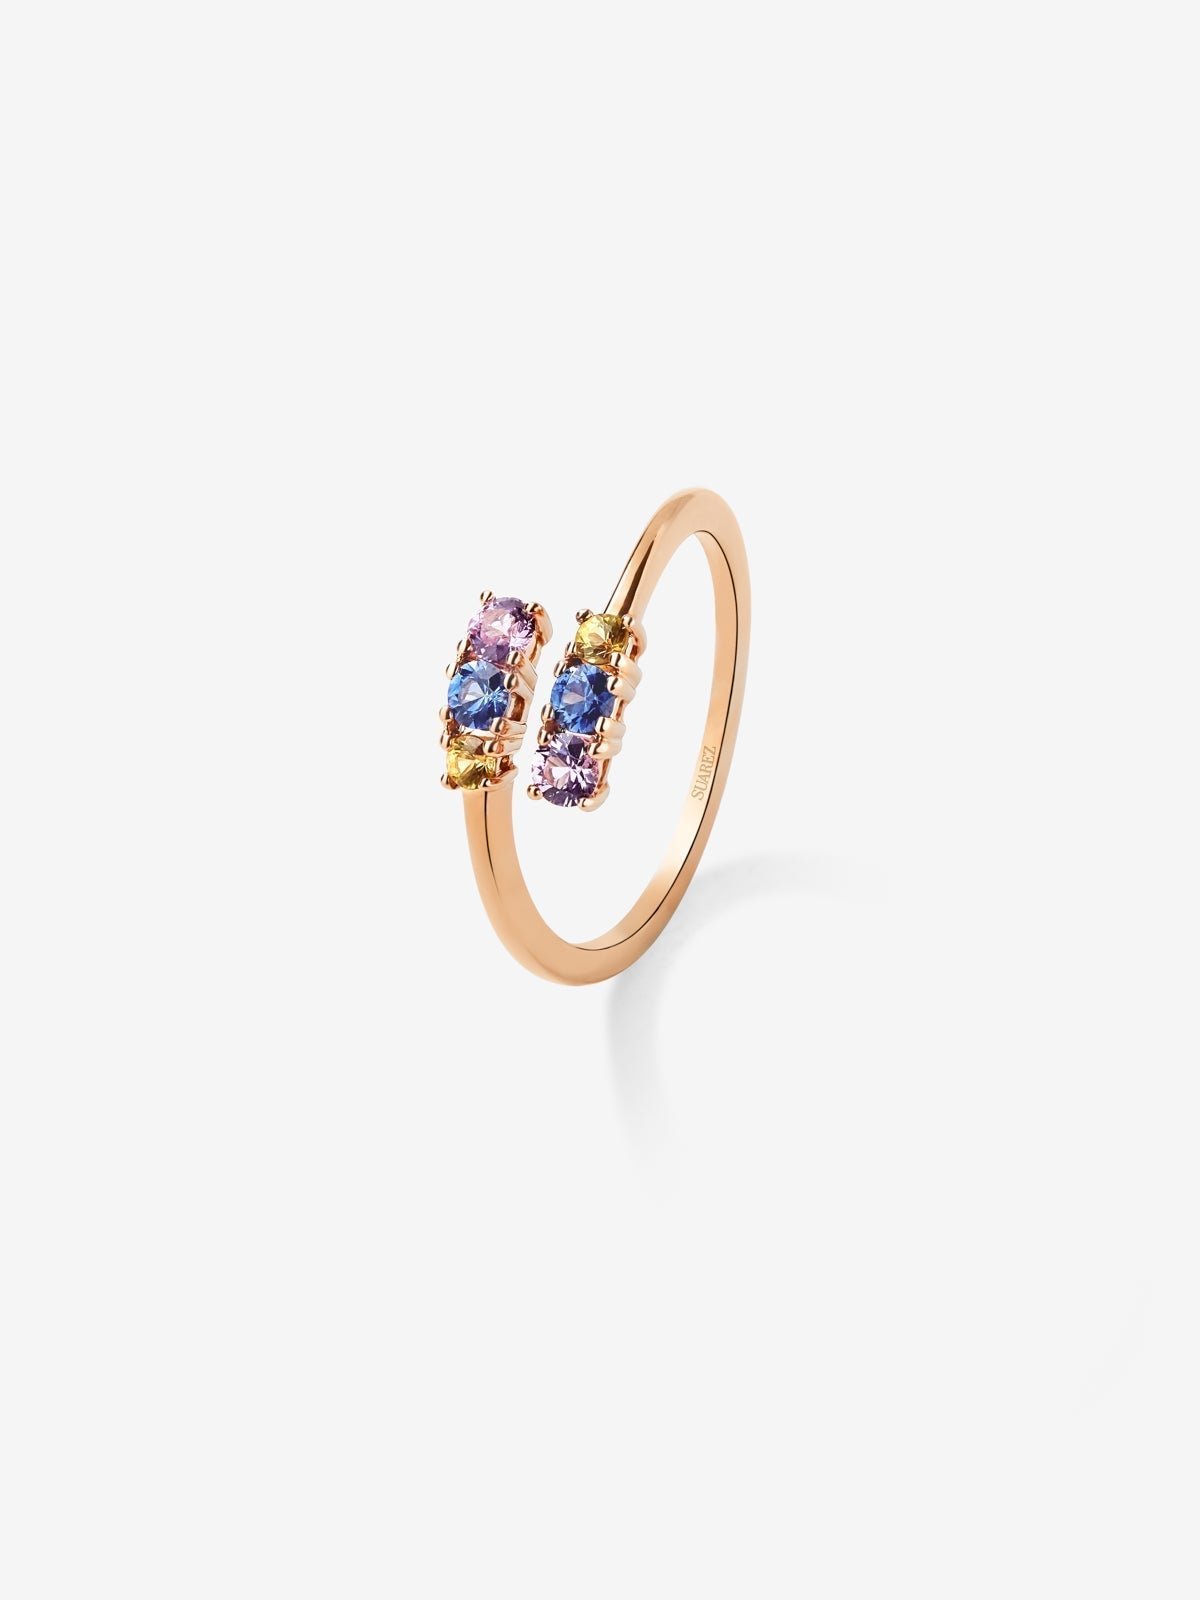 You and me ring in 18K rose gold with 6 multicolored sapphires with a total of 0.49 cts